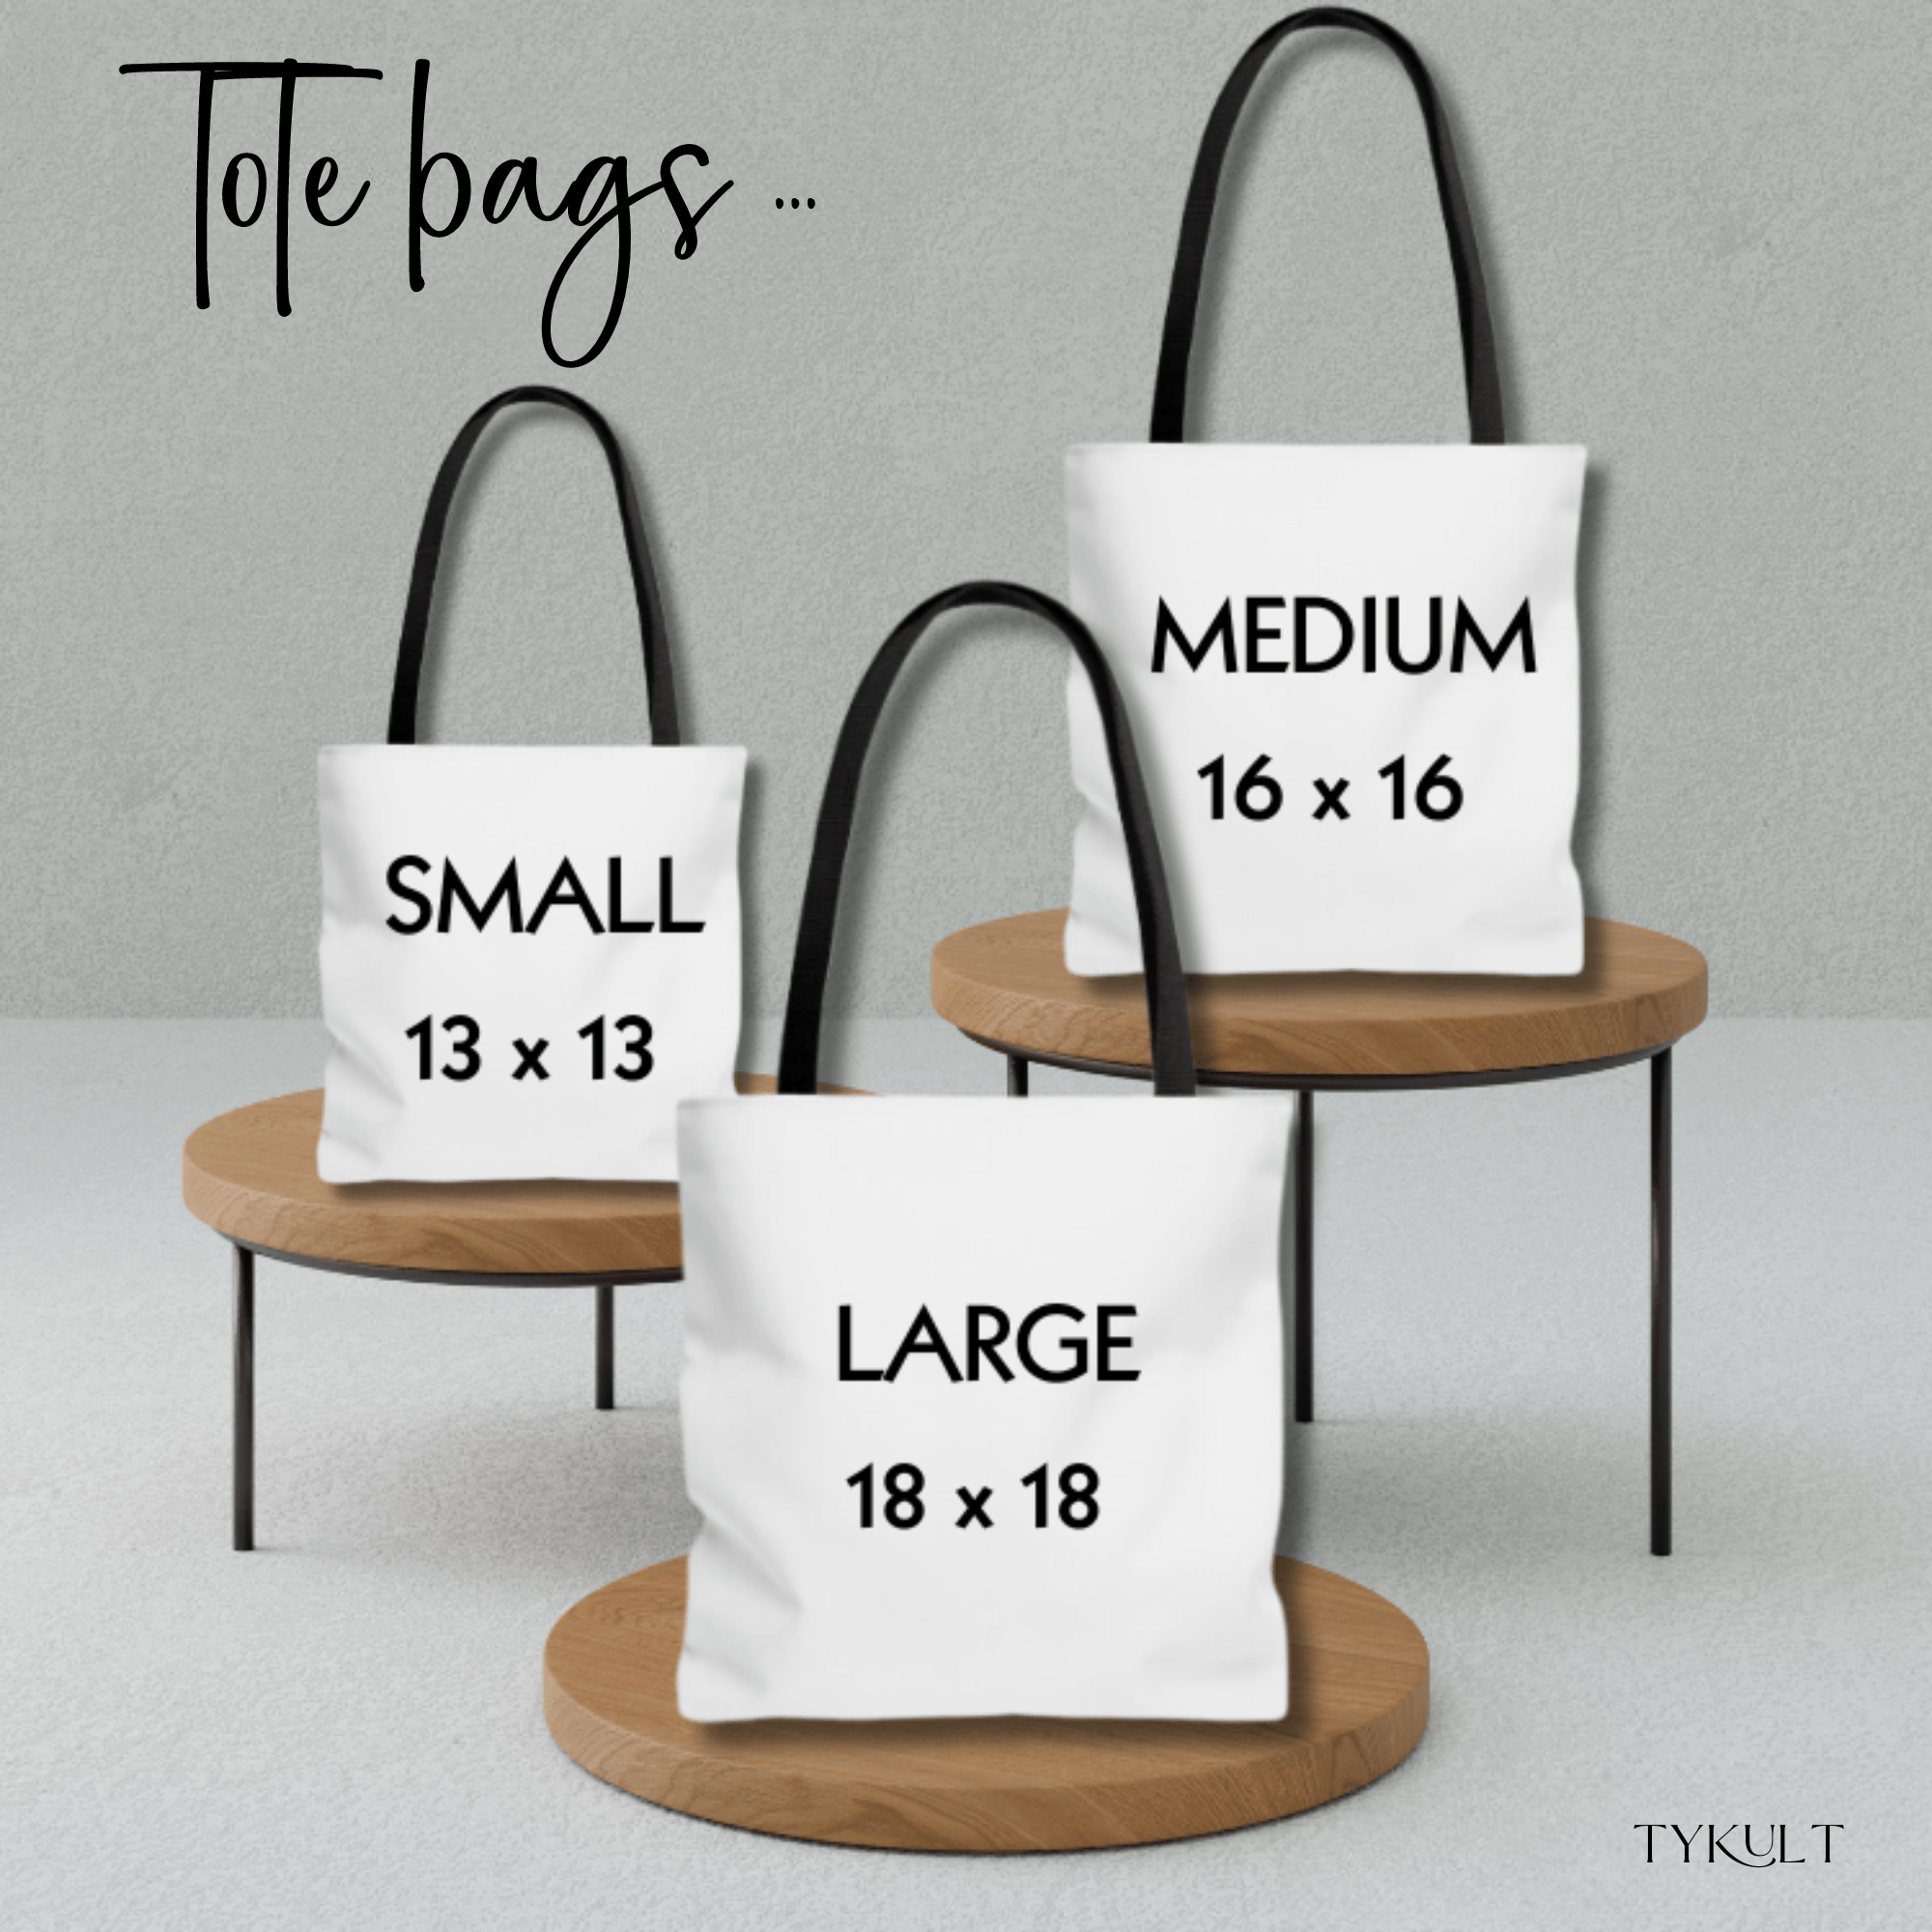 PERSONALIZABLE TOTE BAG | MONOGRAM - J | PERFECT GIFT for BFF, TEACHER, CO-WORKER